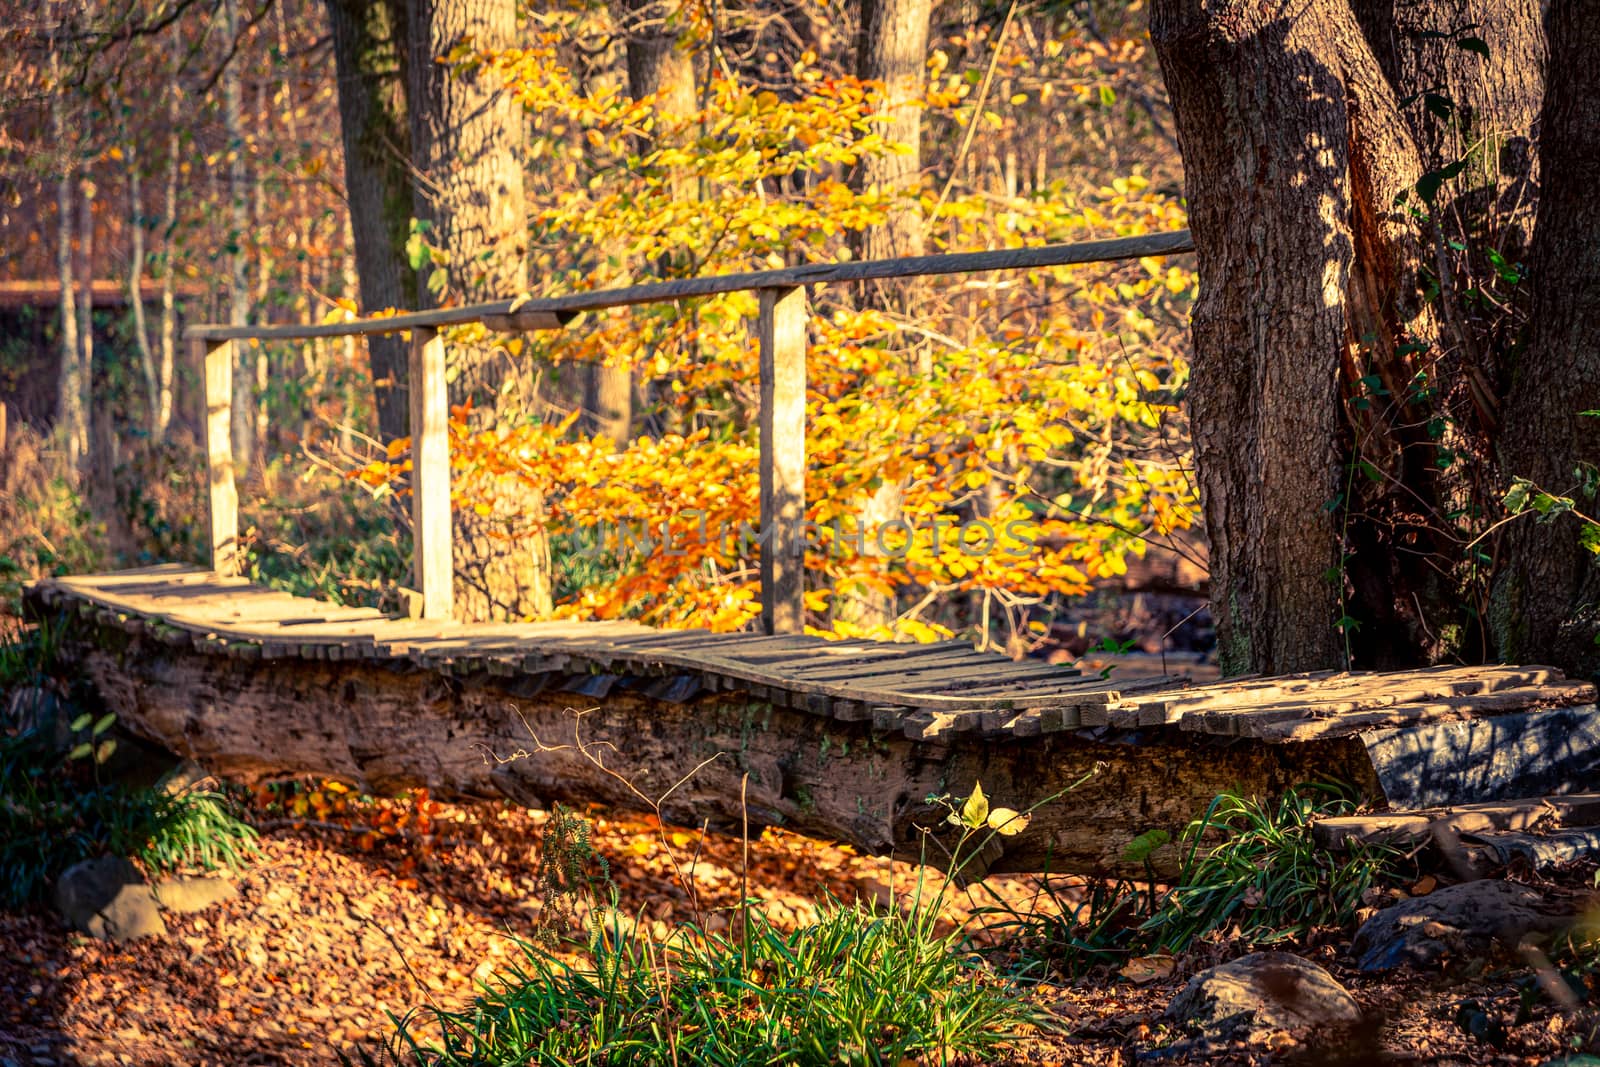 Footbridge over a creek in the forest during autumn or fall